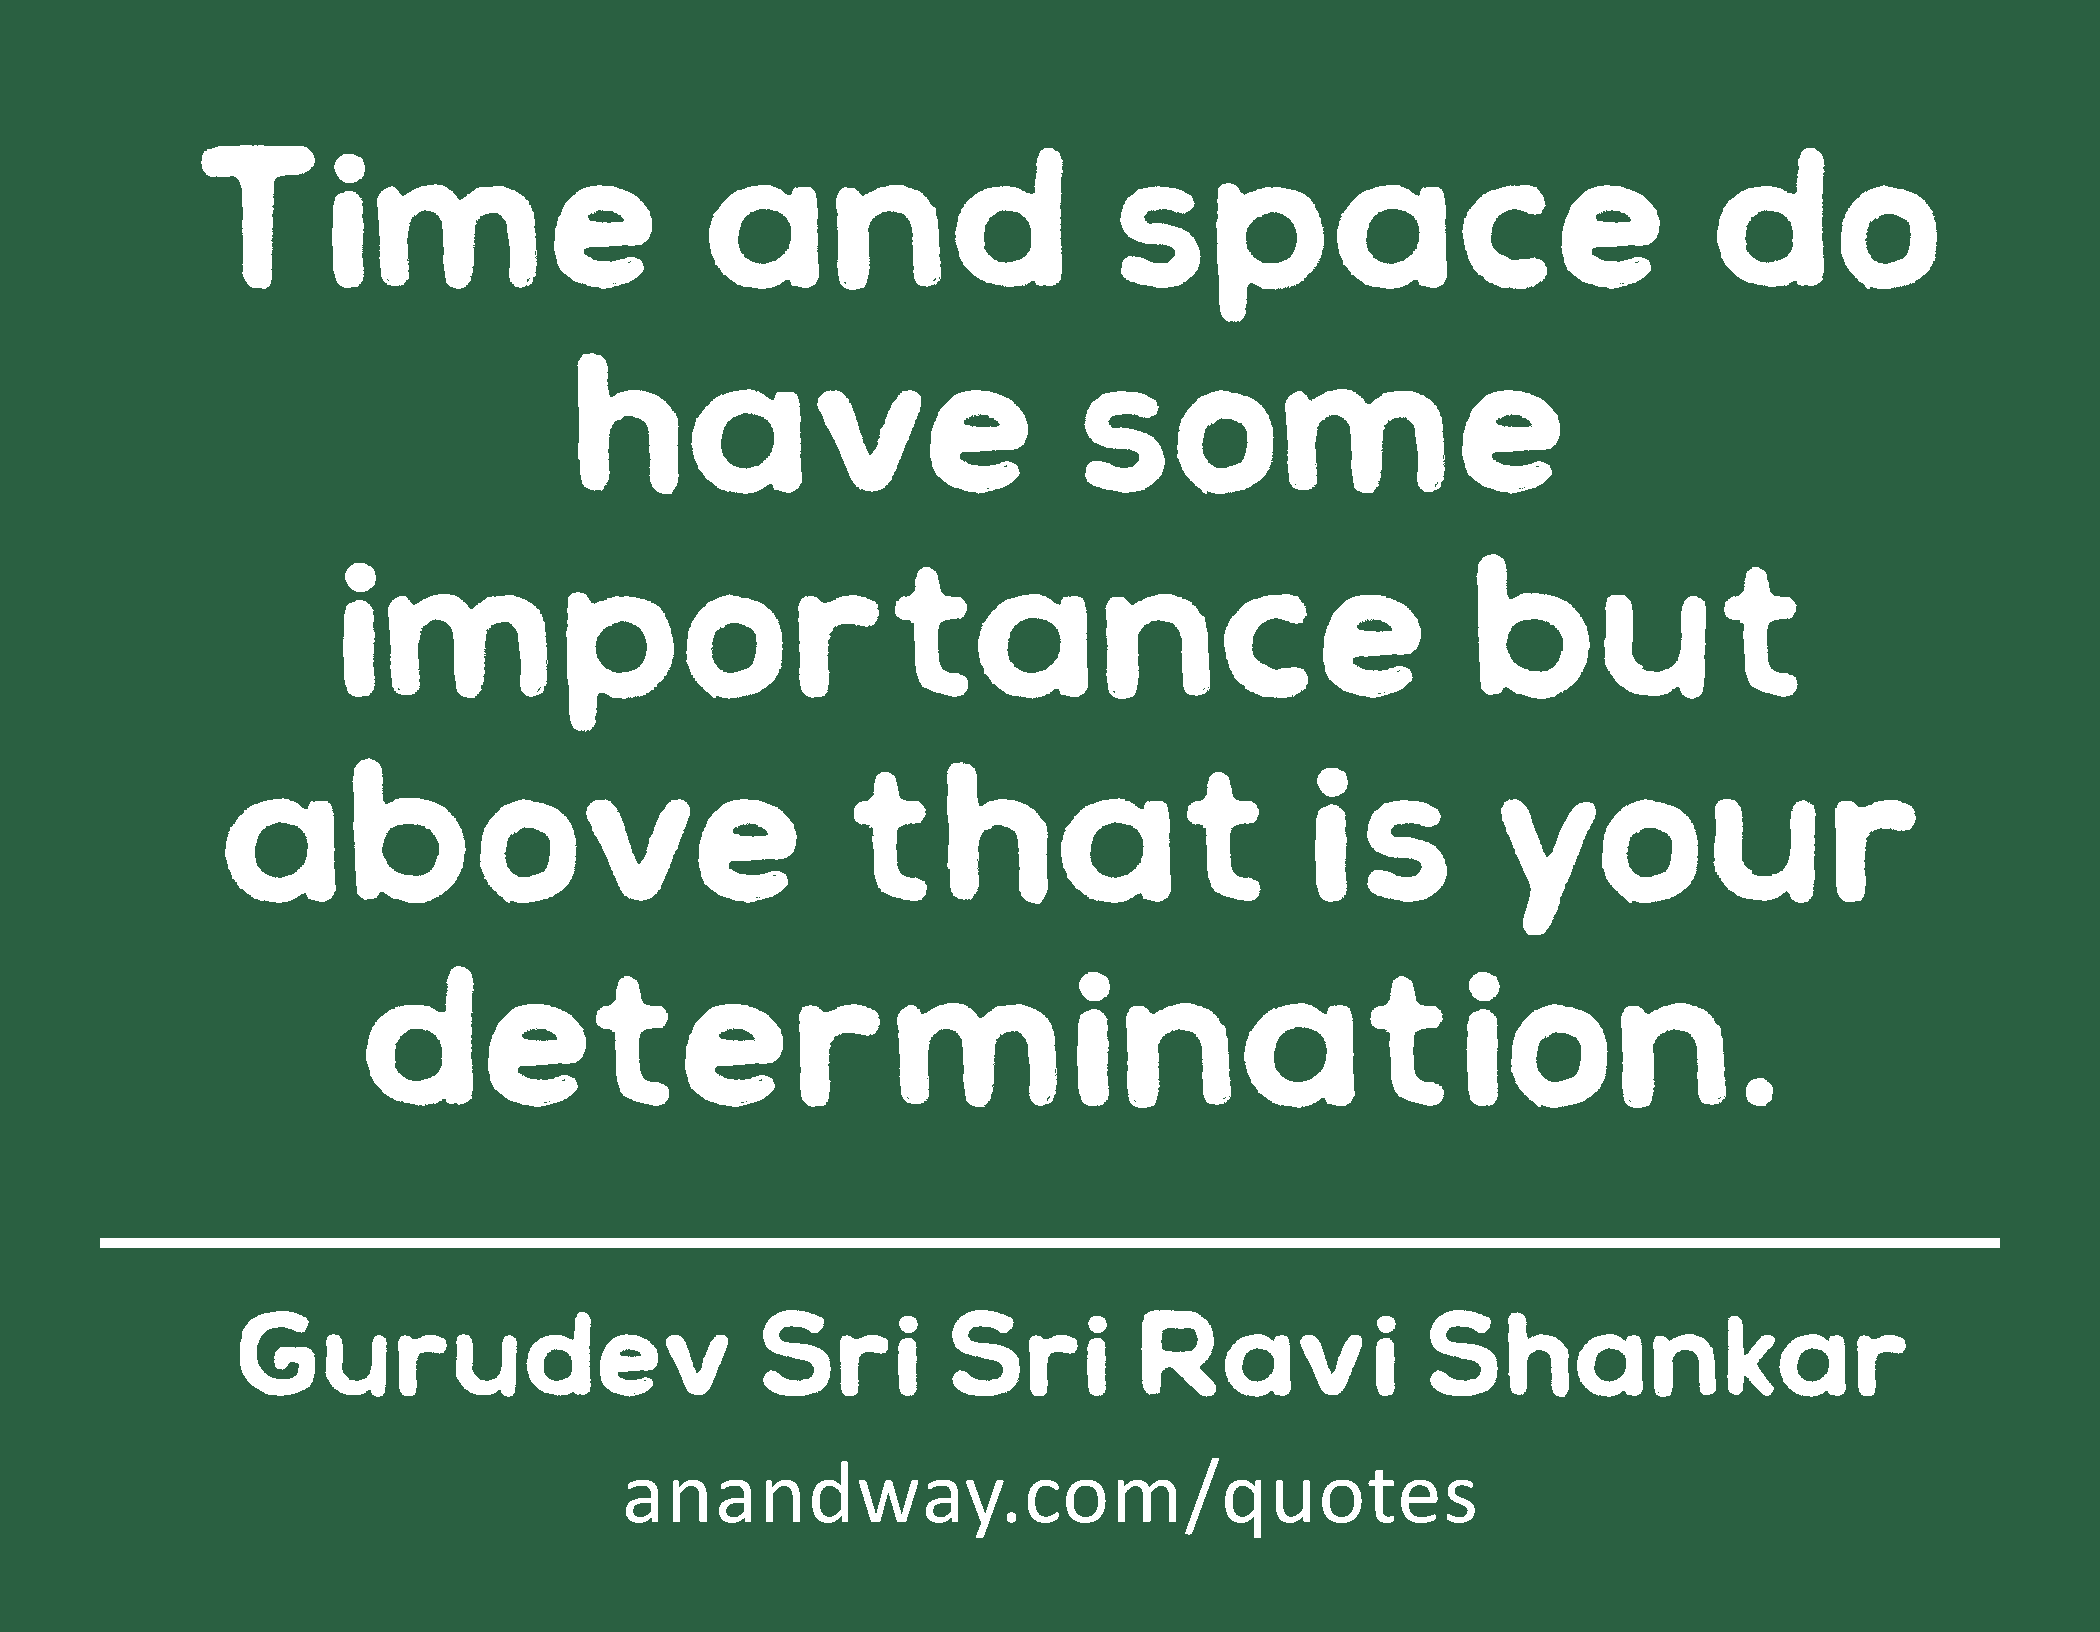 Time and space do have some importance but above that is your determination. 
 -Gurudev Sri Sri Ravi Shankar